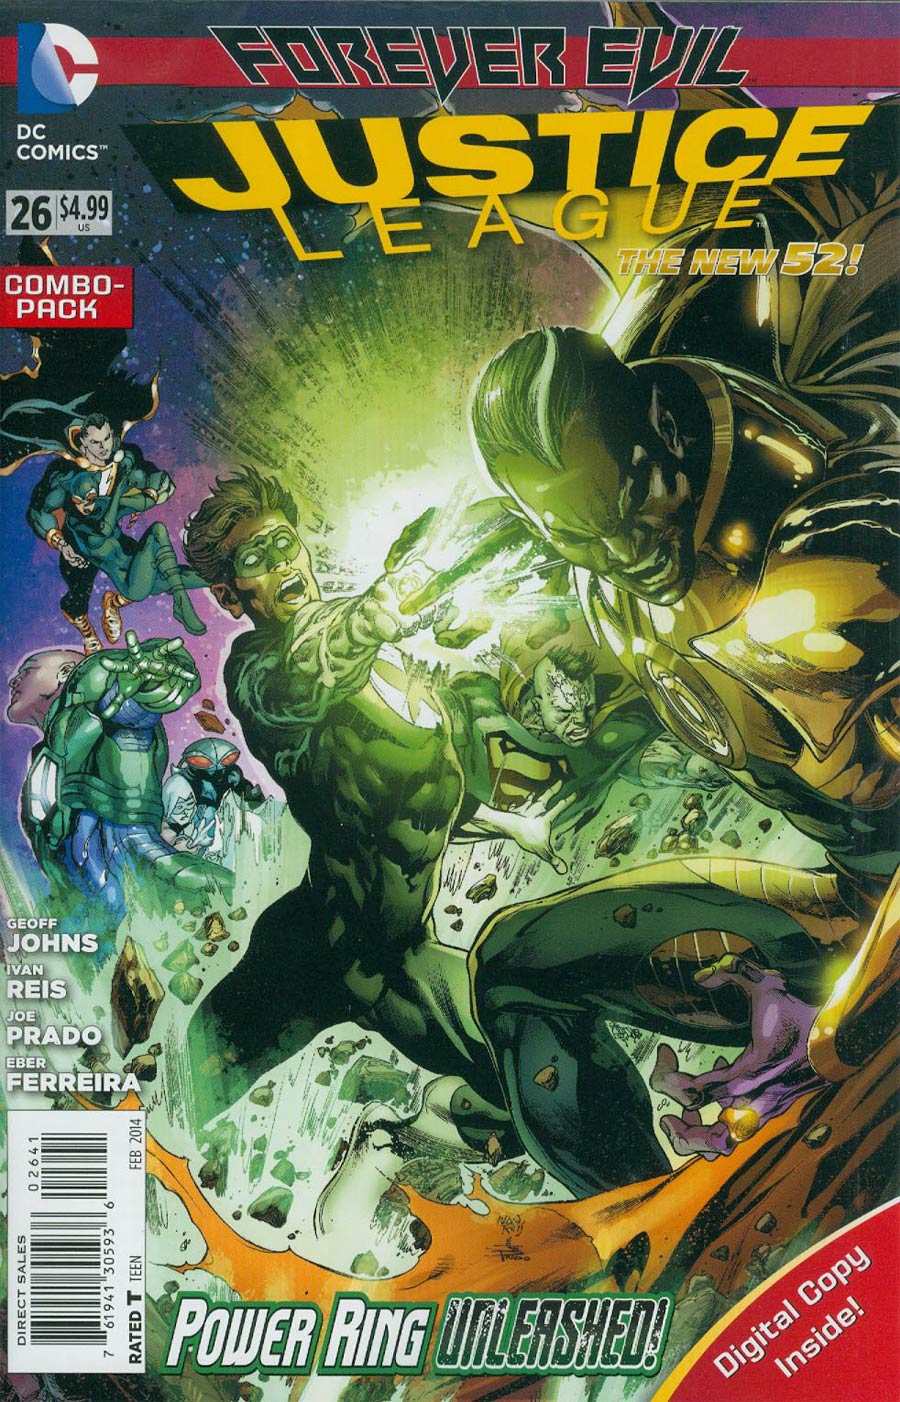 Justice League Vol 2 #26 Cover C Combo Pack Without Polybag (Forever Evil Tie-In)